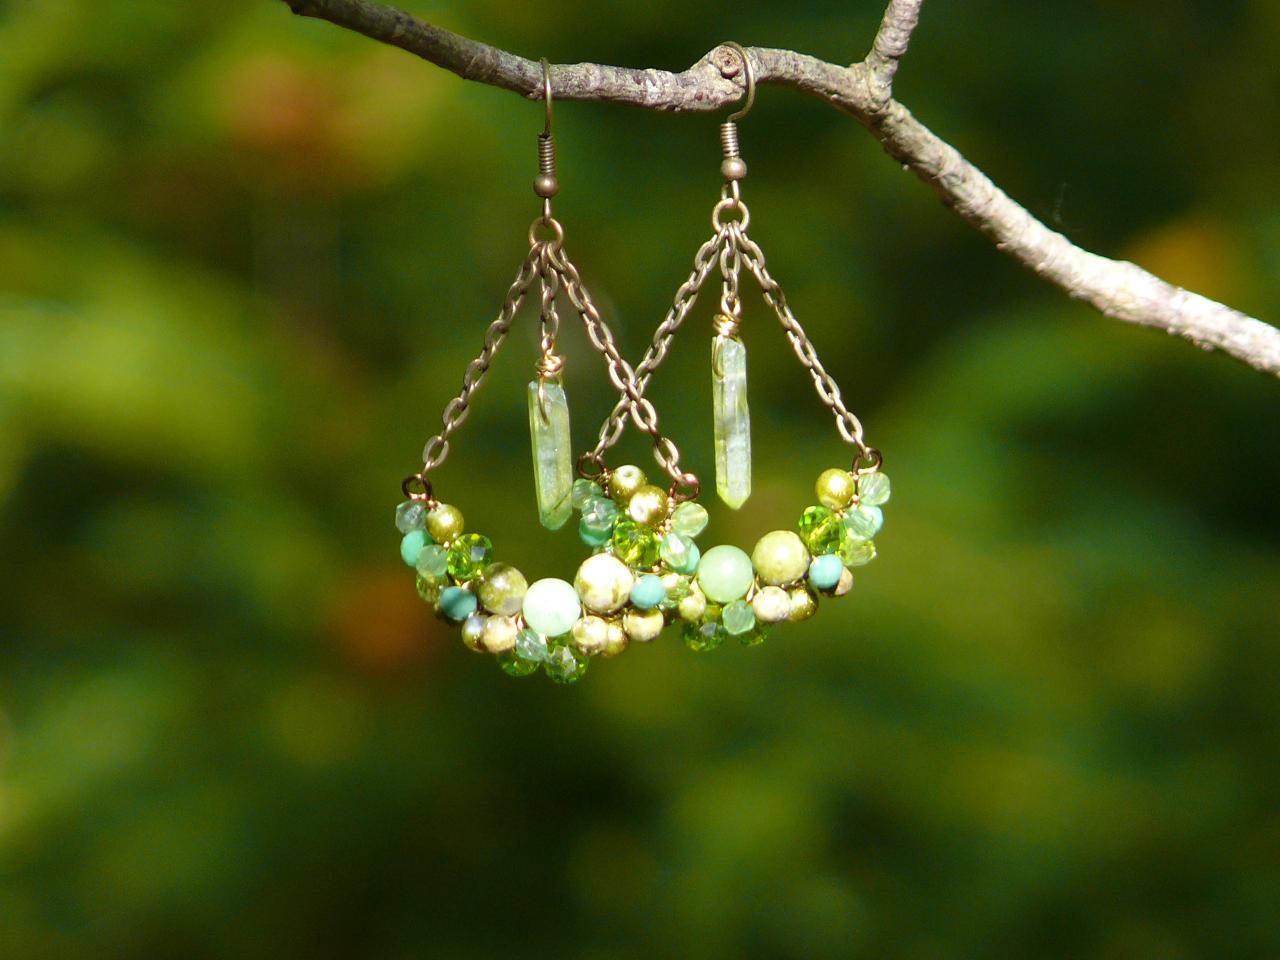 Green Bubbly Swings, Bronze And Green Bohemian Chandelier Earrings With Gemstones,army Green Boho Gemstone Earrings With Quartz Points